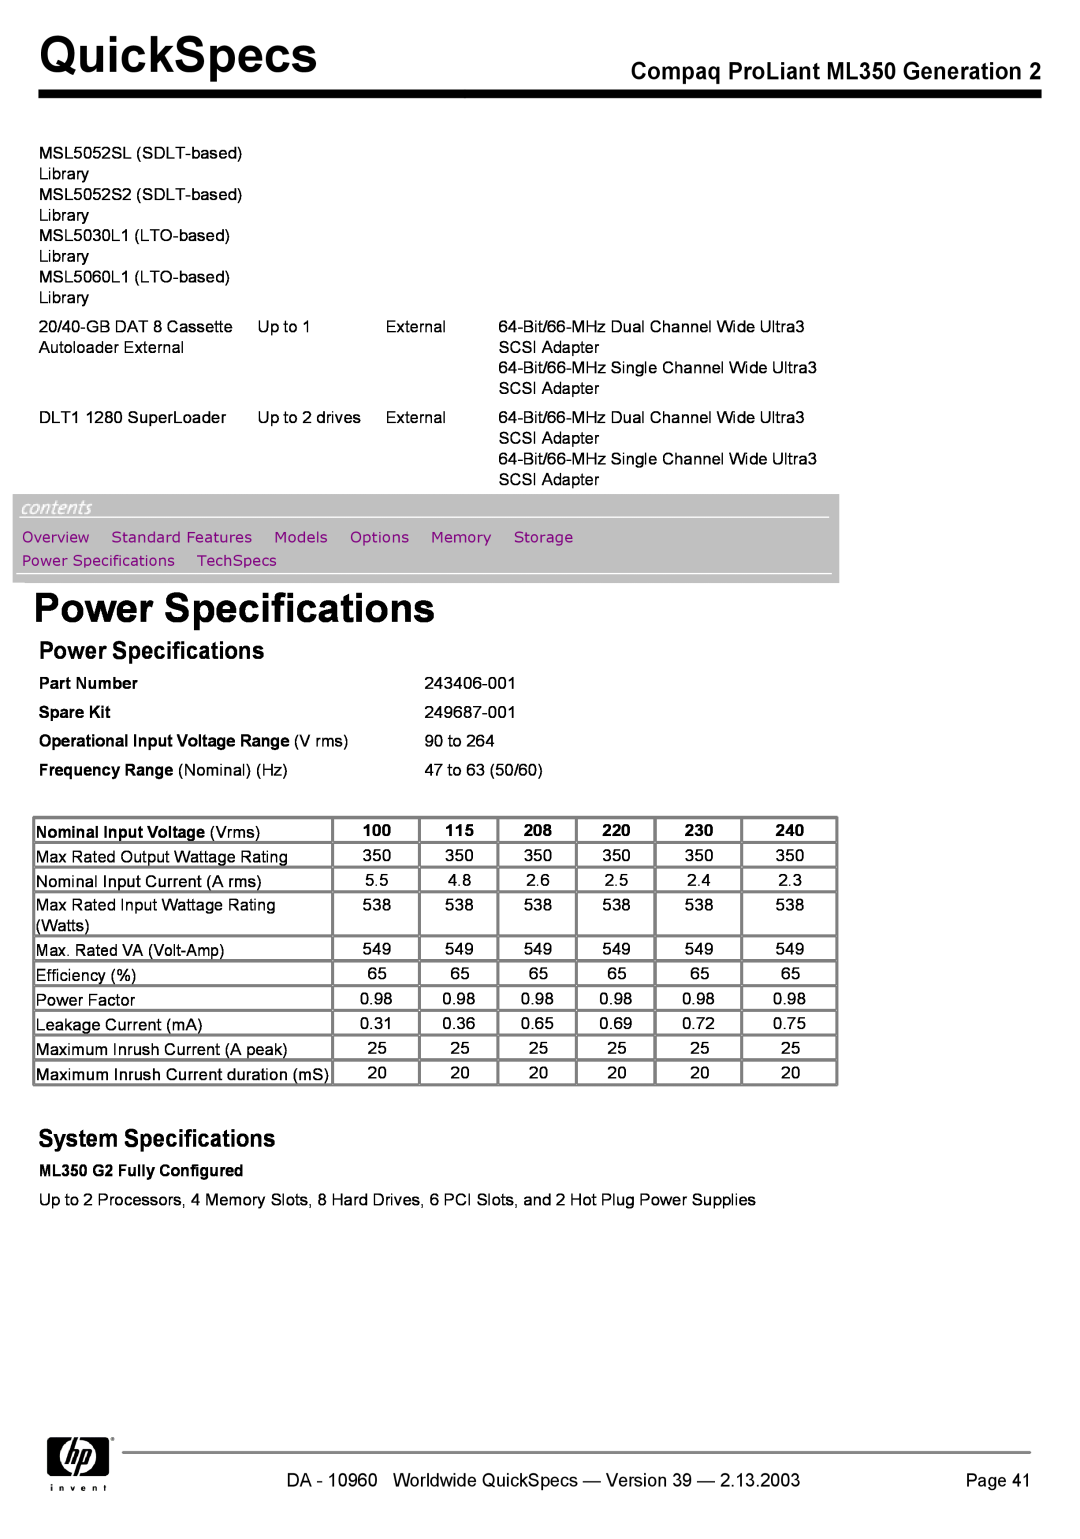 Compaq specifications Power Specifications, System Specifications, QuickSpecs, Compaq ProLiant ML350 Generation, Page 